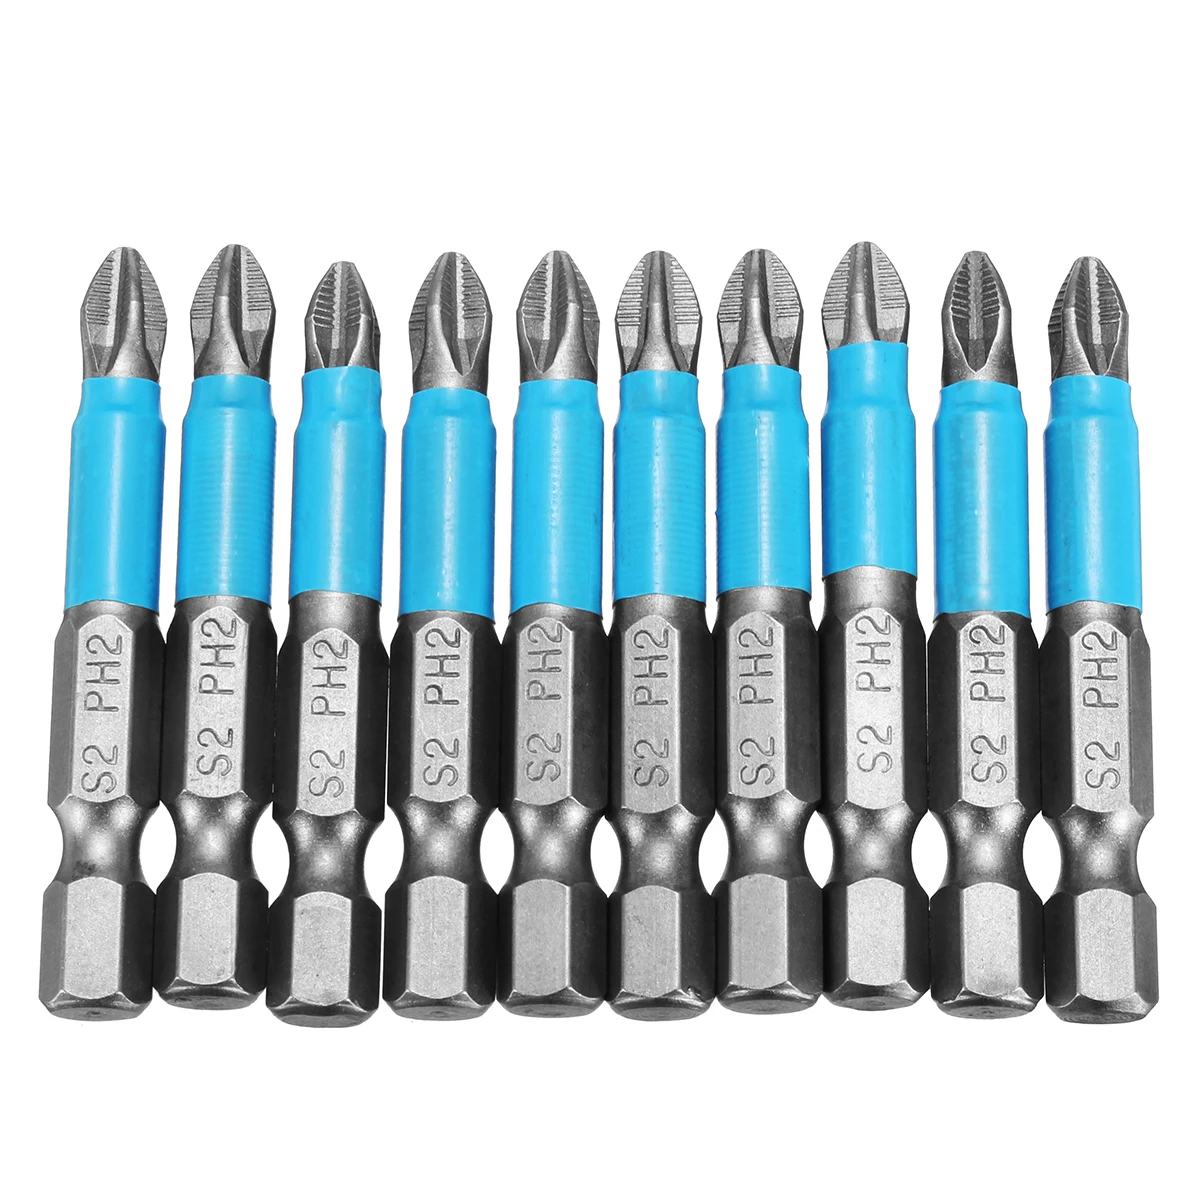 

10Pcs Magnetic 1/4'' Hex Shank Anti-slip PH2 for Phillips Screwdriver Drill Bits Set High Snap Hardness Durable S2 Single Head